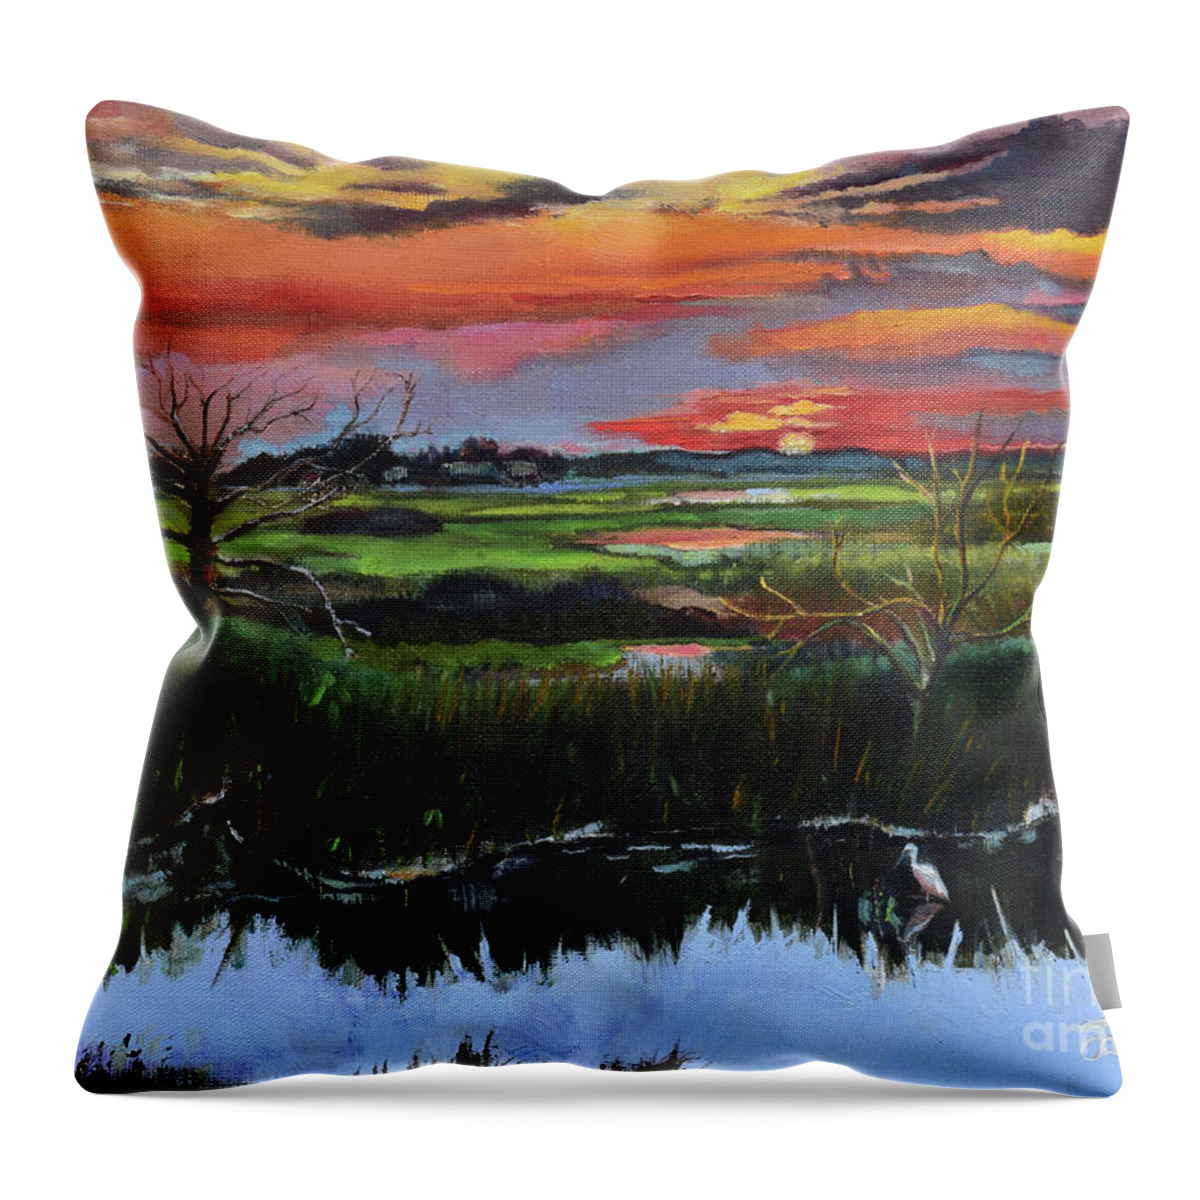 St. Simons Throw Pillow featuring the painting St. Simons Sunrise by Jan Dappen